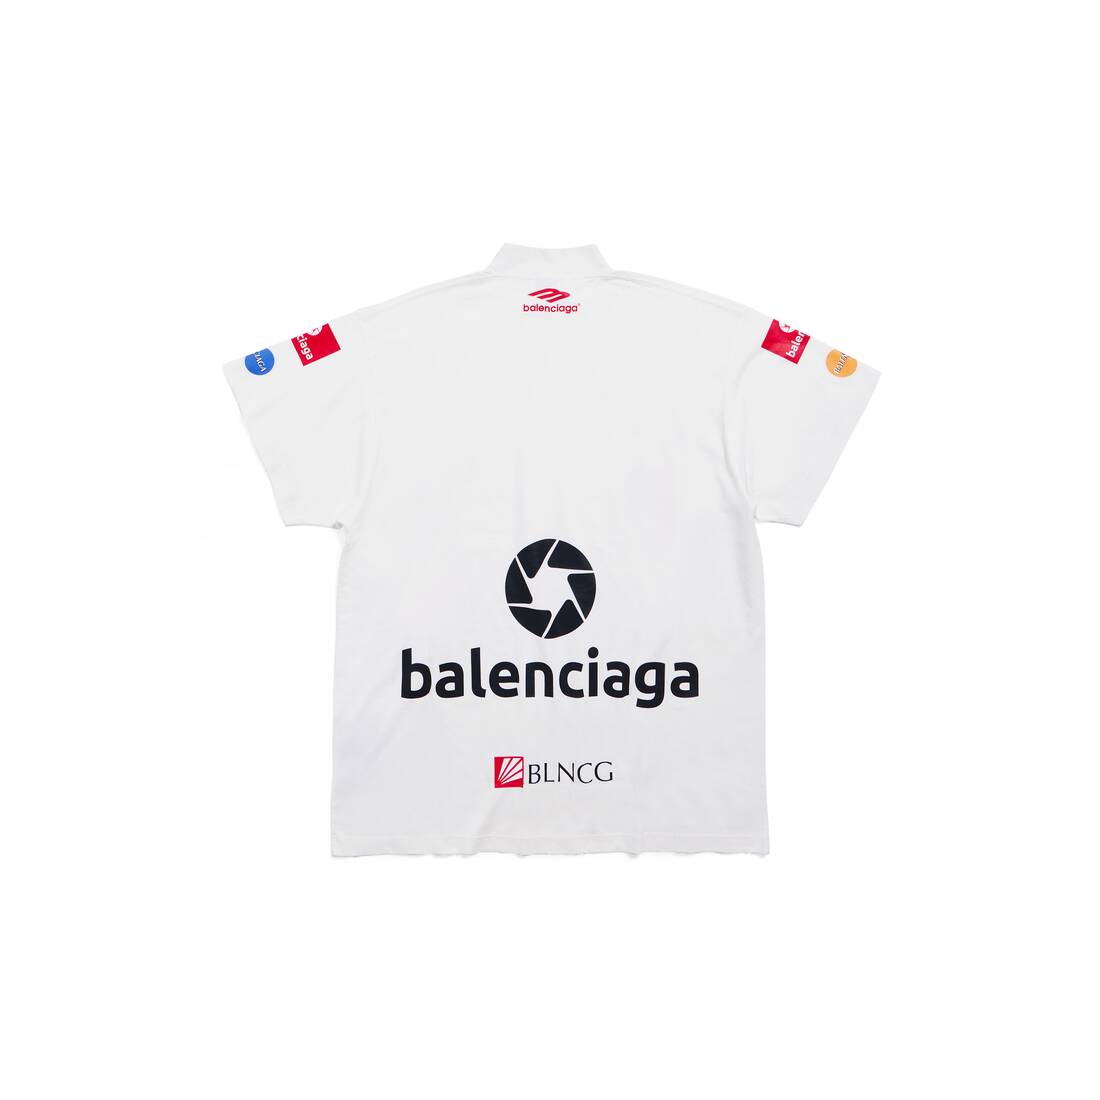 Top League T-shirt Oversized in White